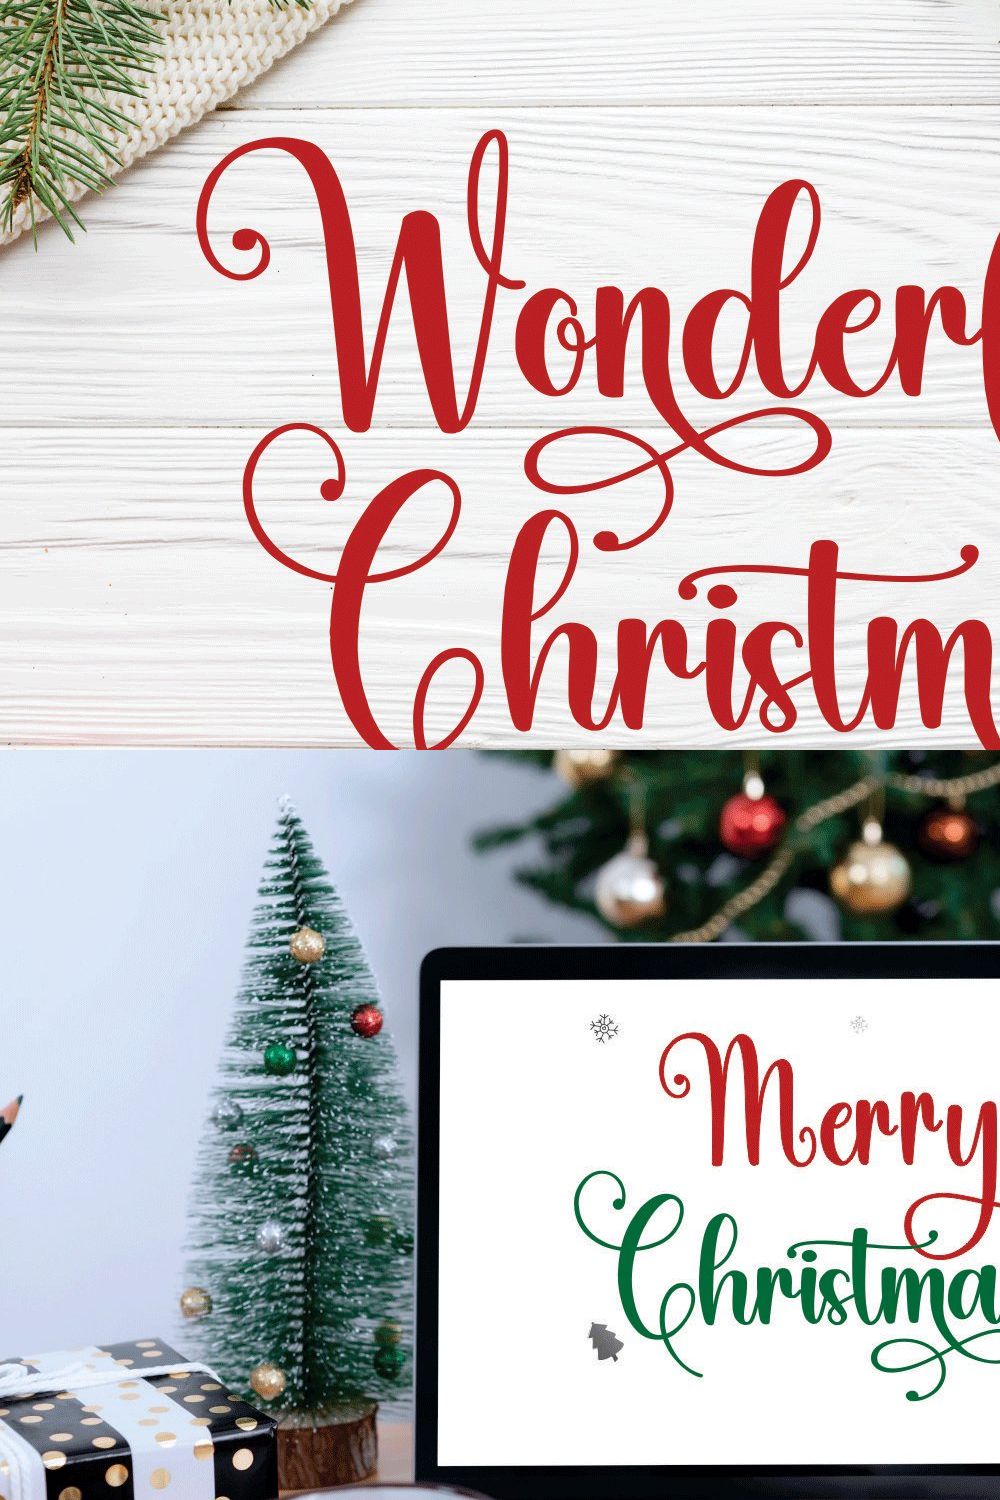 Wonderful Christmas pinterest preview image.